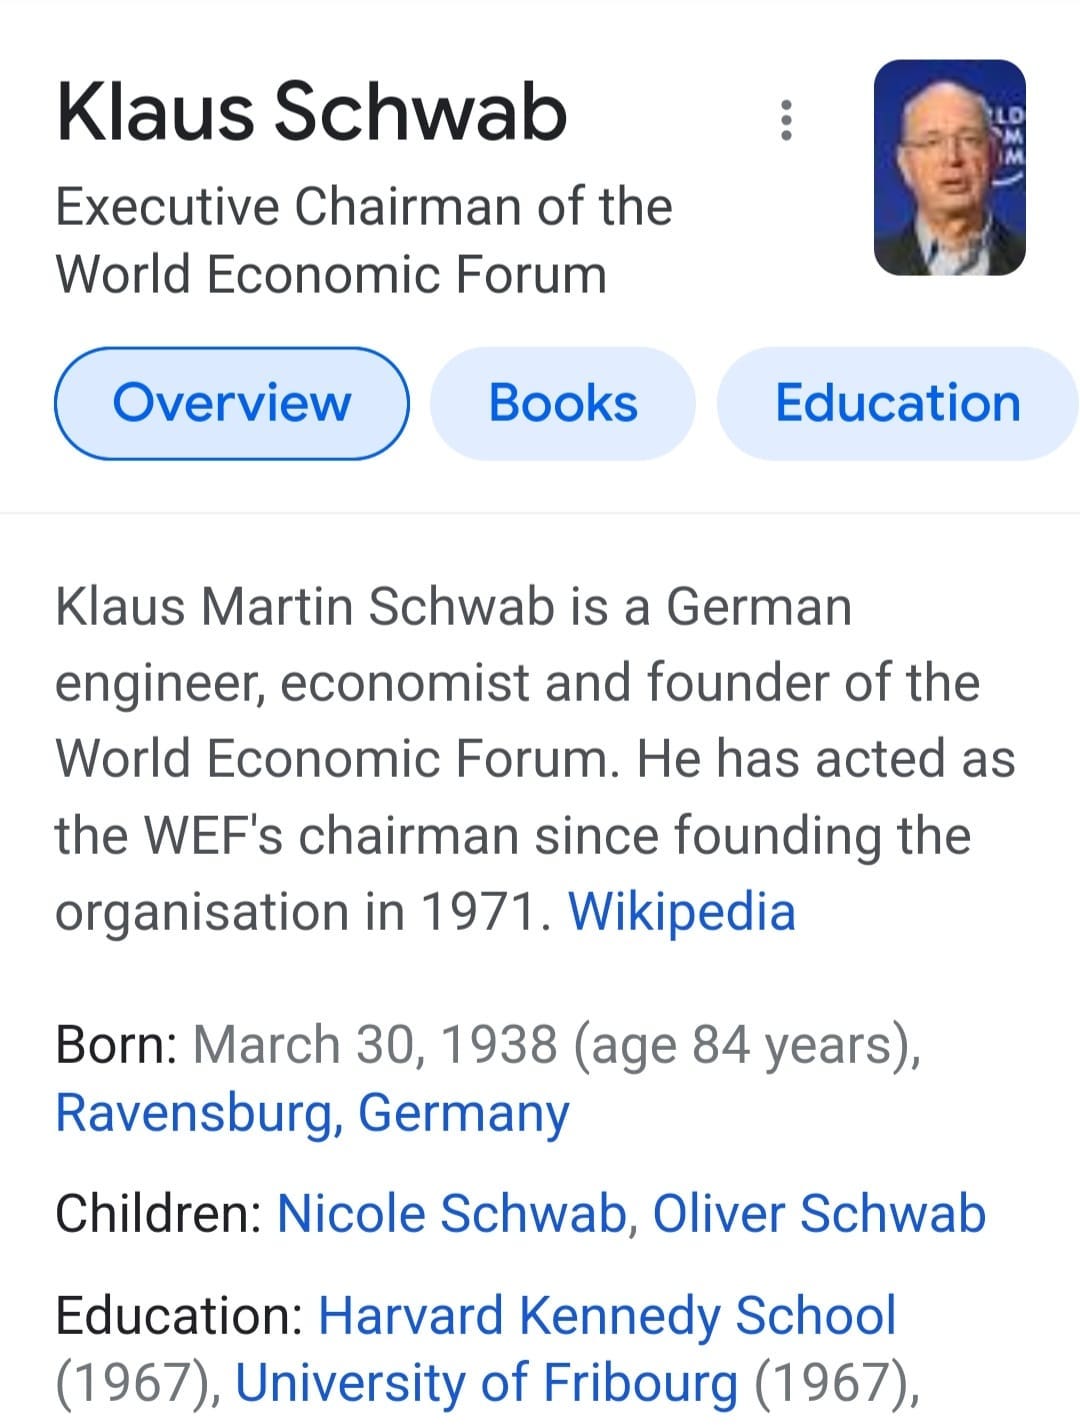 May be an image of 1 person and text that says 'Klaus Schwab Executive Chairman of the World Economic Forum Overview Books Education Klaus Martin Schwab is a German engineer, economist and founder of the World Economic Forum. He has acted as the WEF's chairman since founding the organisation in 1971. Wikipedia Born: March 30, 1938 (age 84 years), Ravensburg, Germany Children: Nicole Schwab, Oliver Schwab Education: Harvard Kennedy School (1967), University of Fribourg (1967),'